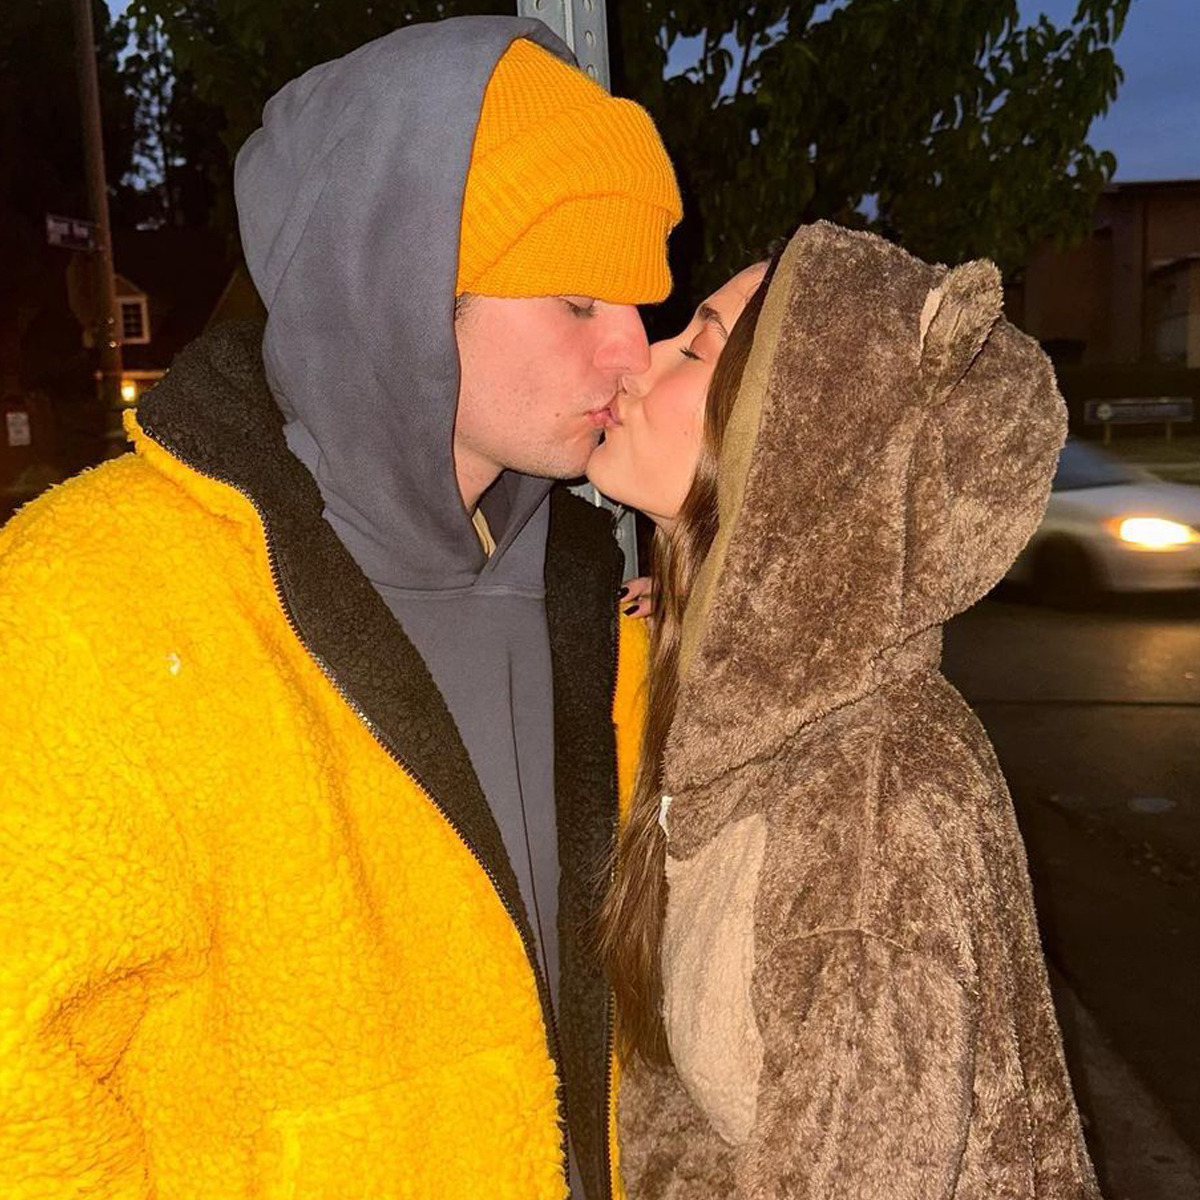 Justin Bieber and Hailey Bieber Kiss in Bear-y Adorable Photo